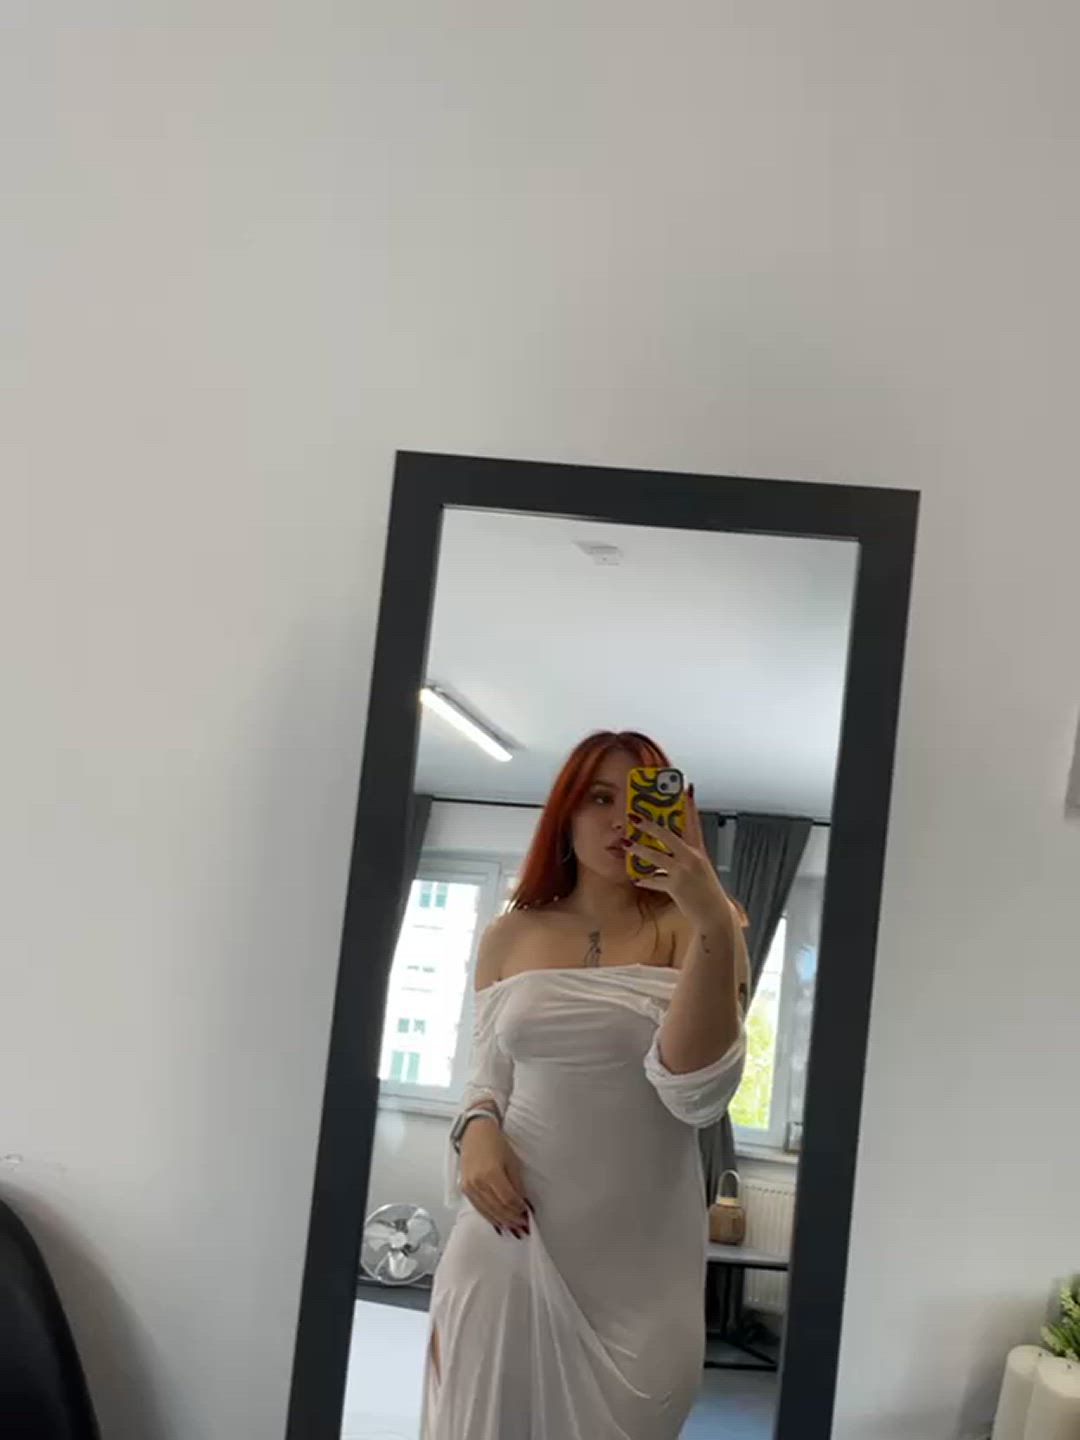 Big Tits porn video with onlyfans model katy9teenie <strong>@katy9teenie</strong>